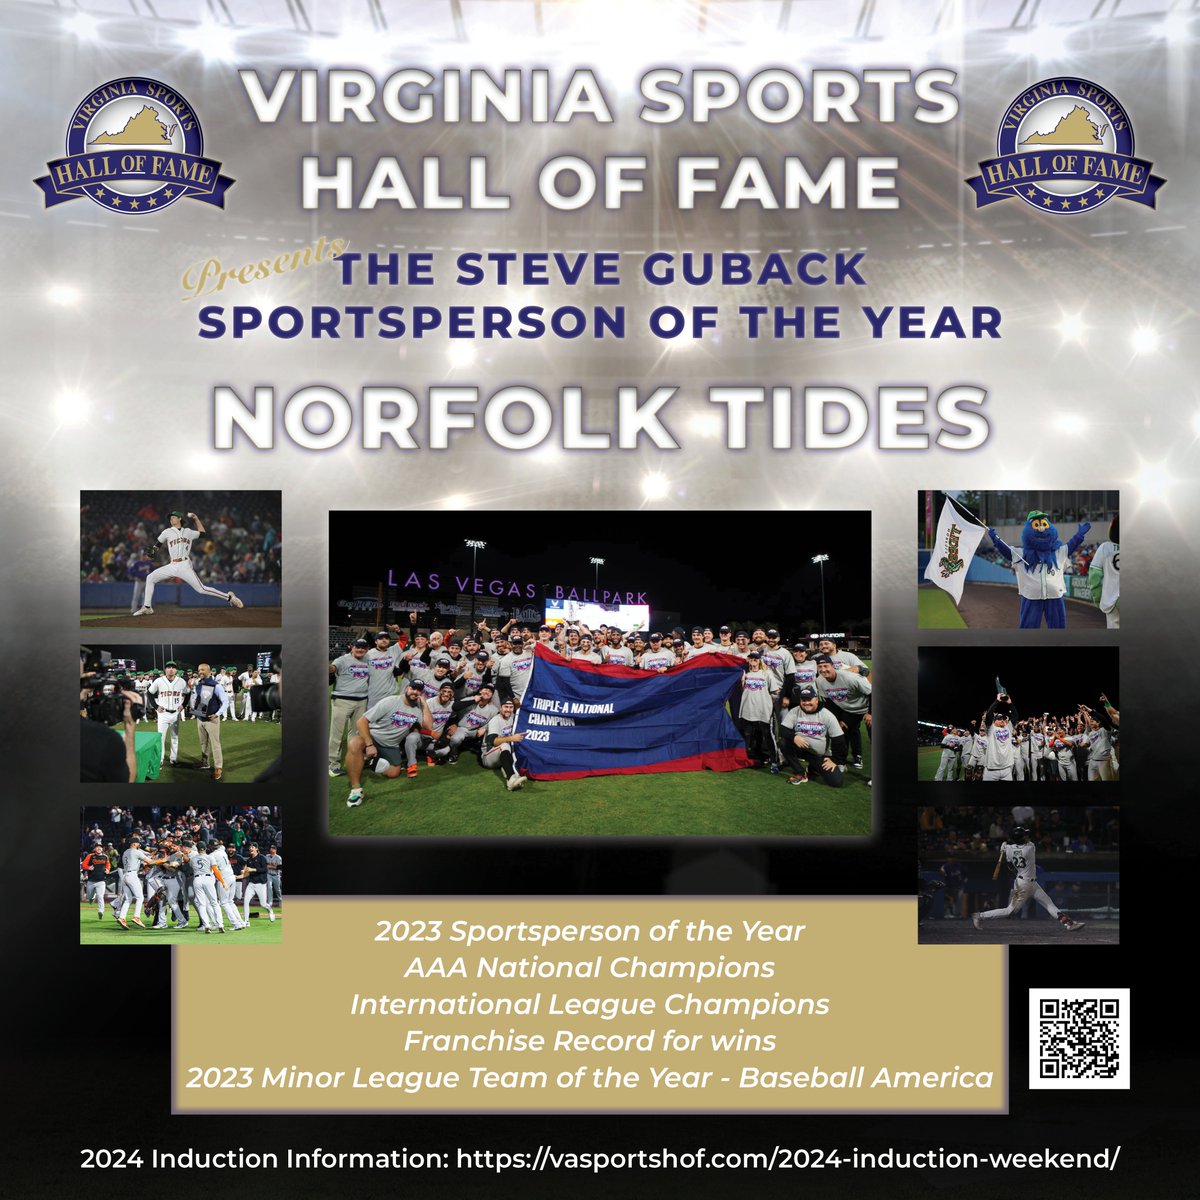 Rounding out our 10-day countdown! The @NorfolkTides set a franchise record for wins in 2023 on their way to the AAA National Championship. The inaugural recipient of the Sportsperson of the Year Award will be part of our celebration in Henrico County! vasportshof.com/2024-induction…